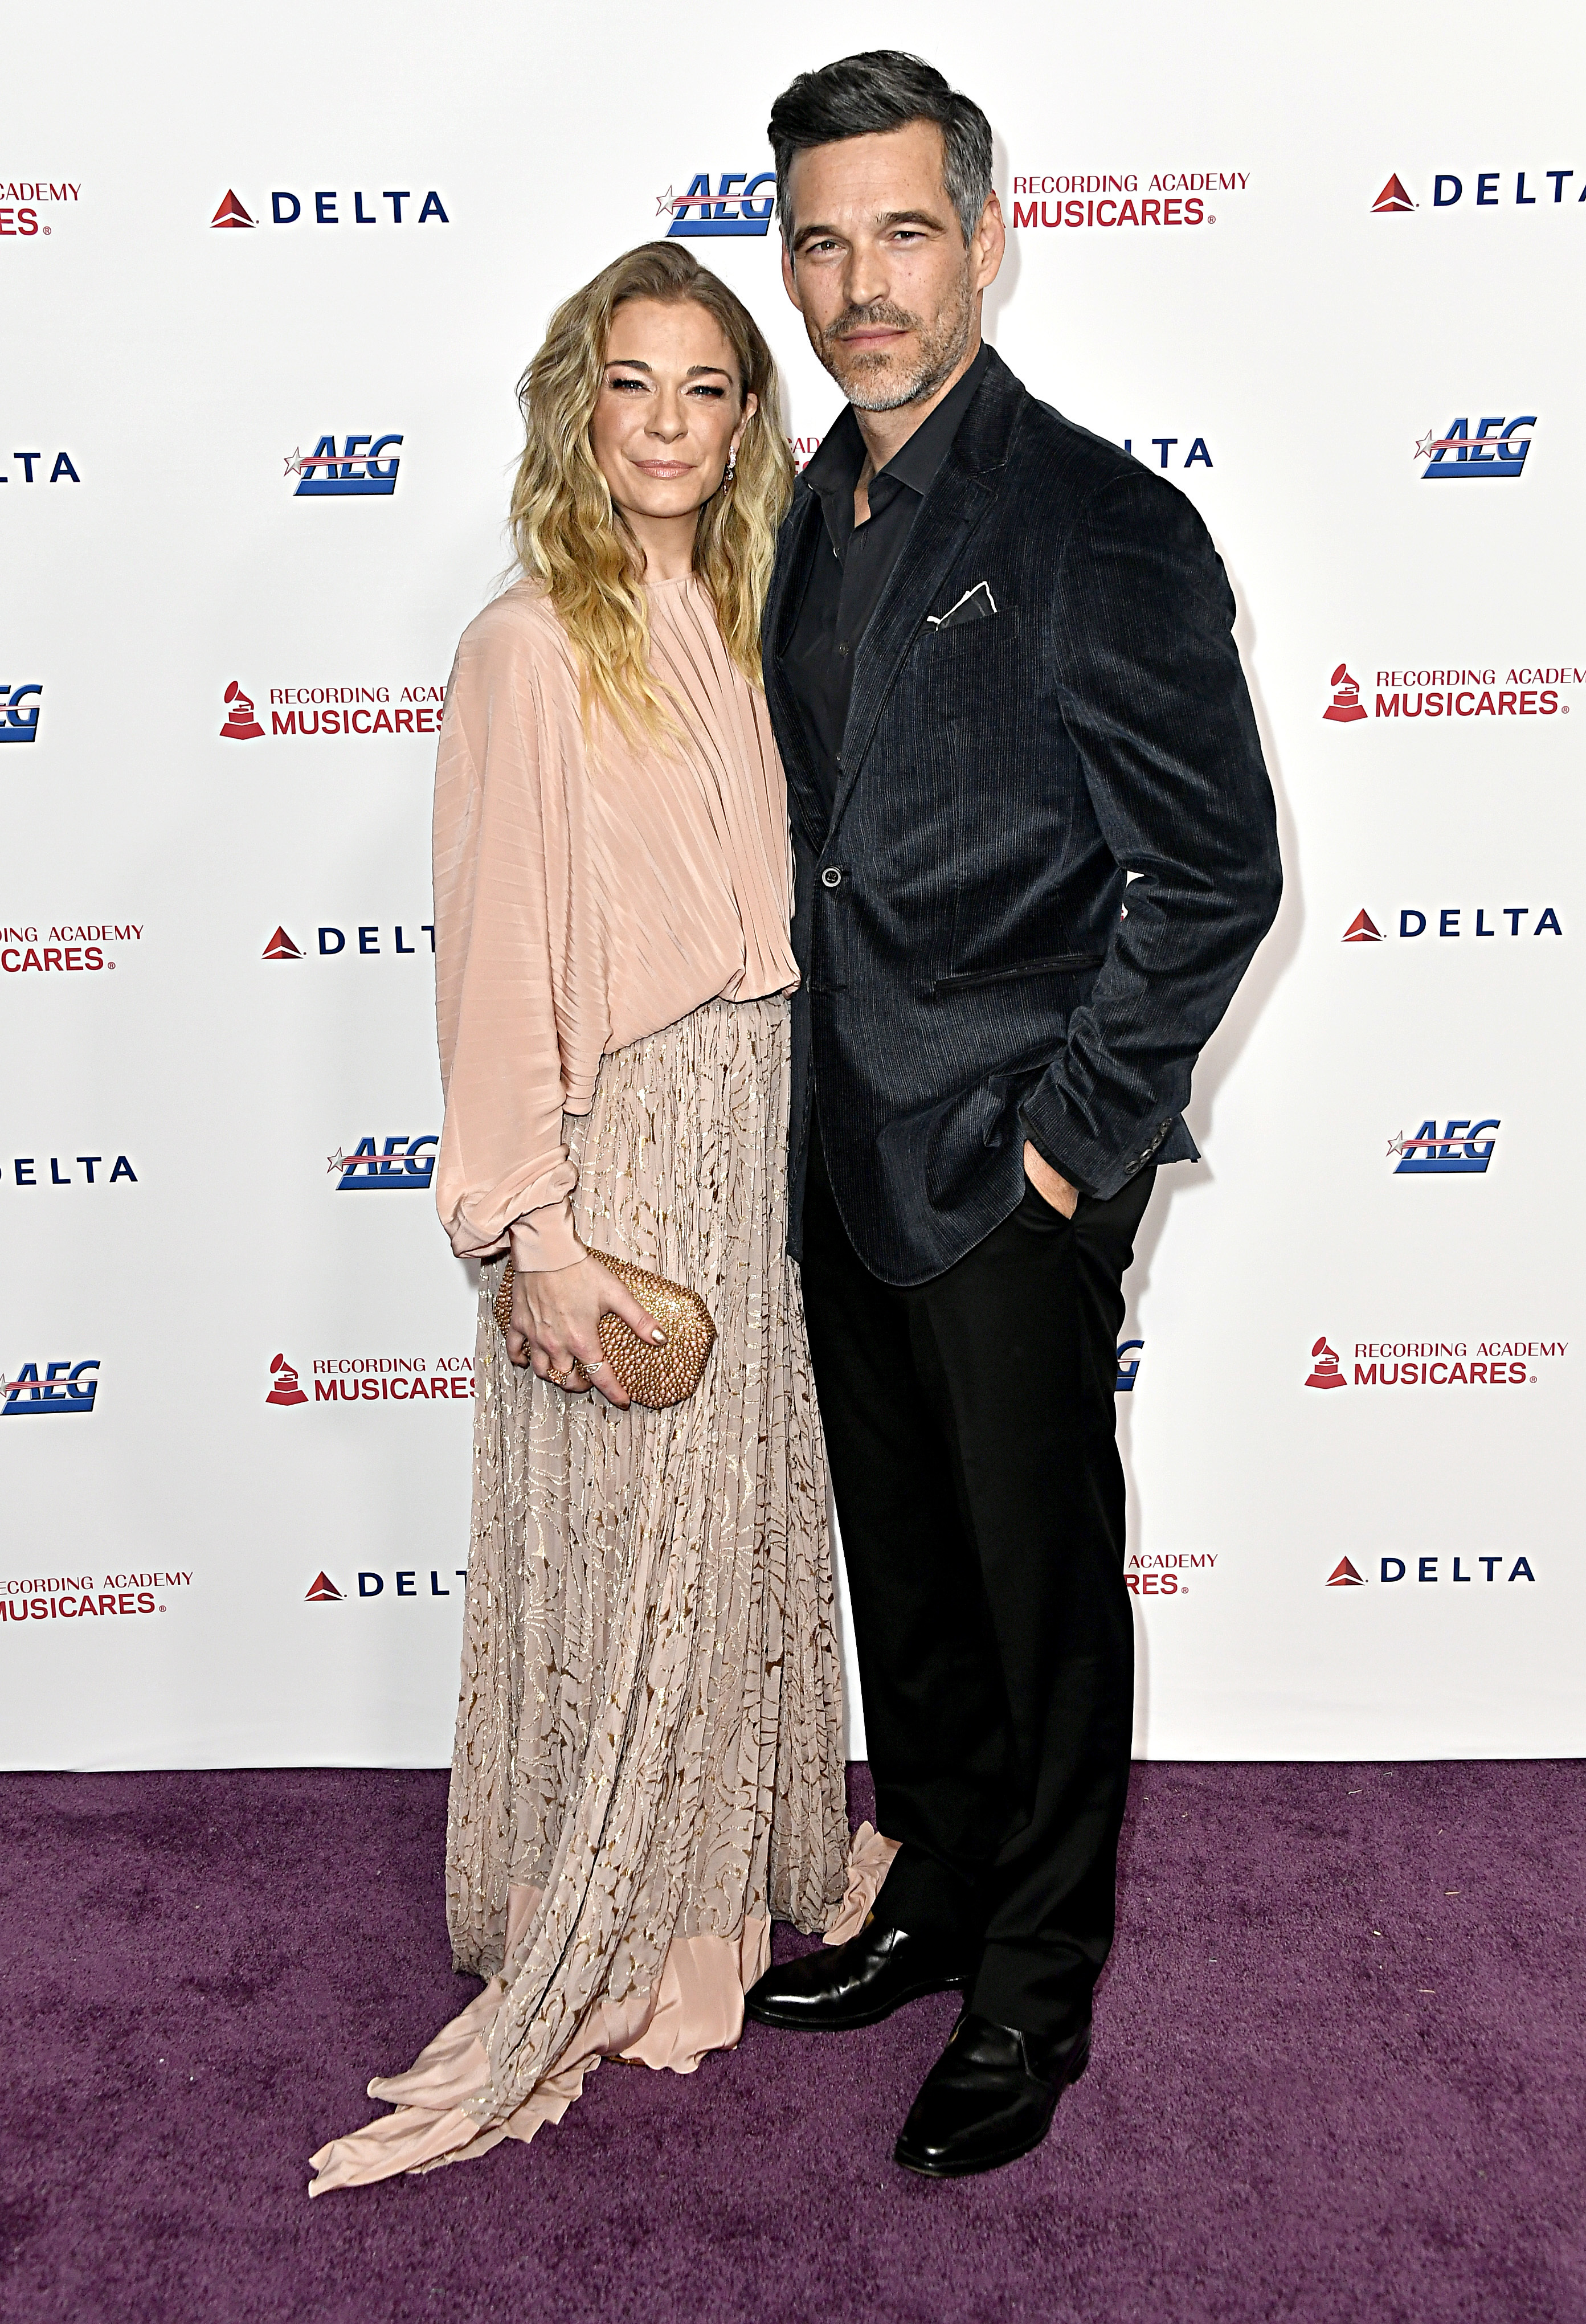 <p>While <a href="https://www.wonderwall.com/celebrity/profiles/overview/leann-rimes-713.article">LeAnn Rimes</a> and Eddie Cibrian are blissfully in love now, their relationship hasn't always been smooth sailing. In 2009, after meeting on the set of the Lifetime flick "Northern Lights," the "Can't Fight the Moonlight" singer became involved with the actor, despite both of them being married to other people at the time (LeAnn was married to dancer Dean Sheremet, while Eddie was married to "The Real Housewives of Beverly Hills" star Brandi Glanville). LeAnn and Eddie went on to marry in 2010 -- the same year the country star publicly said that she didn't regret the affair. "It happens every day to so many people," she told Robin Roberts. "And if I take away my album sales, my words … you have just another couple. You had two couples whose marriages didn't work who really stumbled upon each other and fell in love." </p>